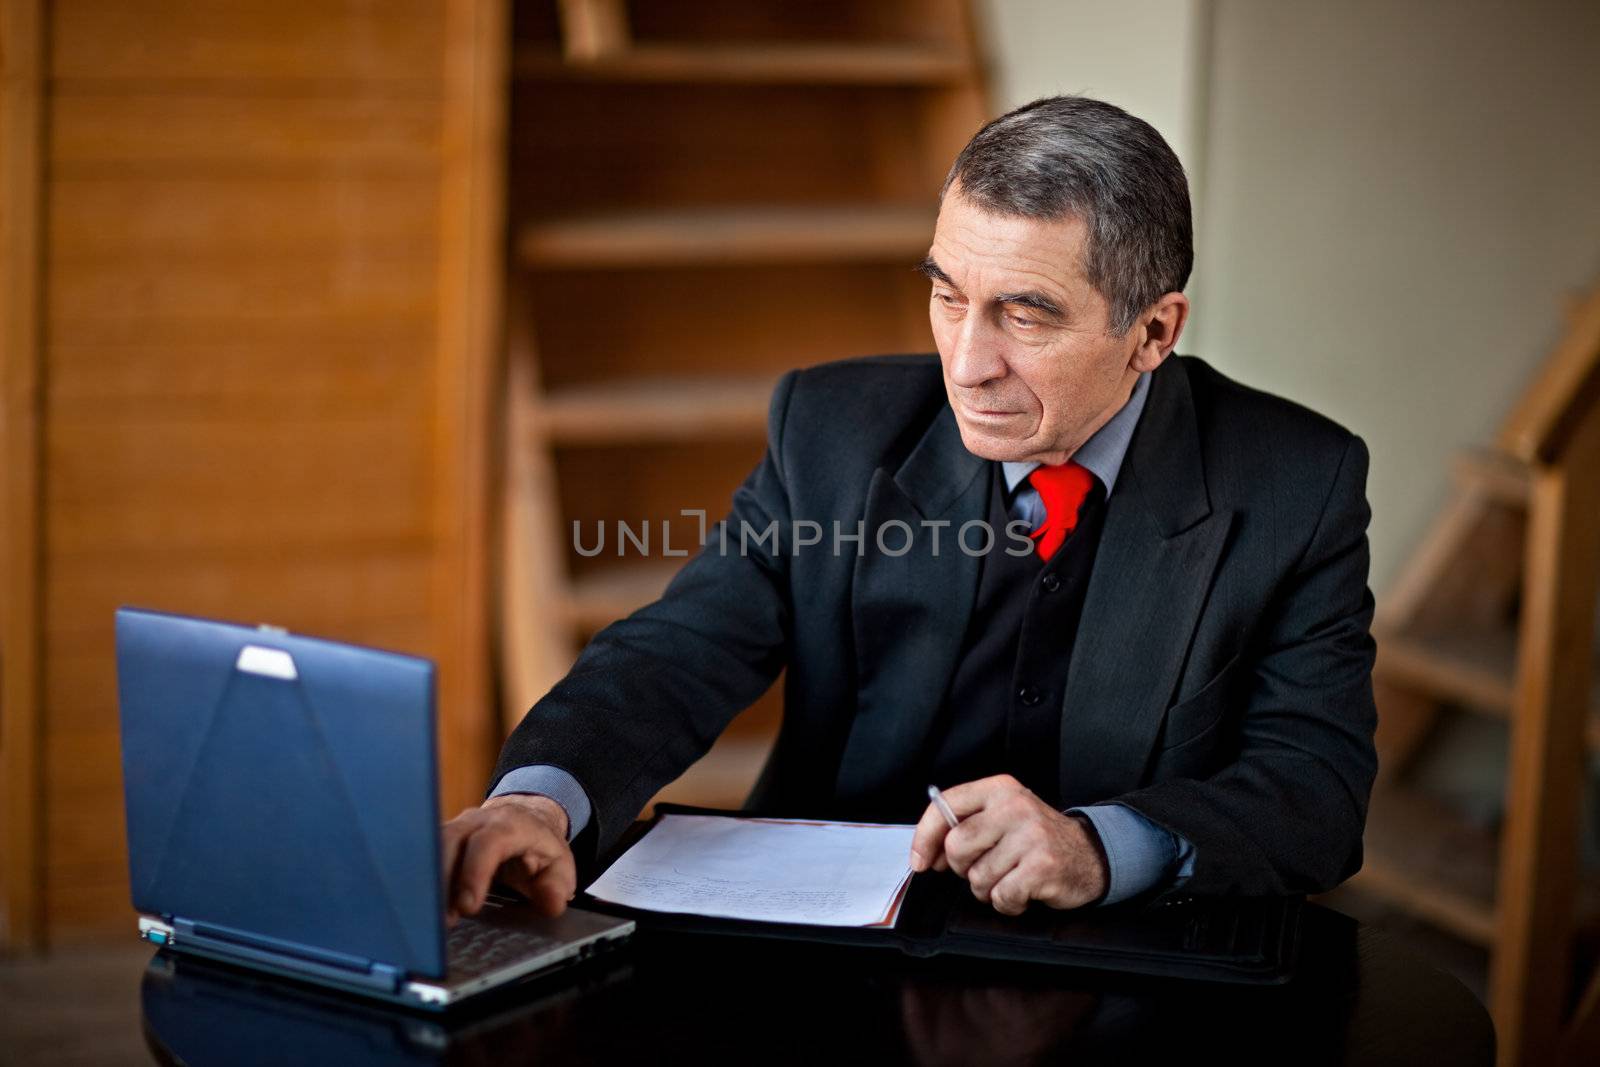 Business man typing and working on laptop computer
